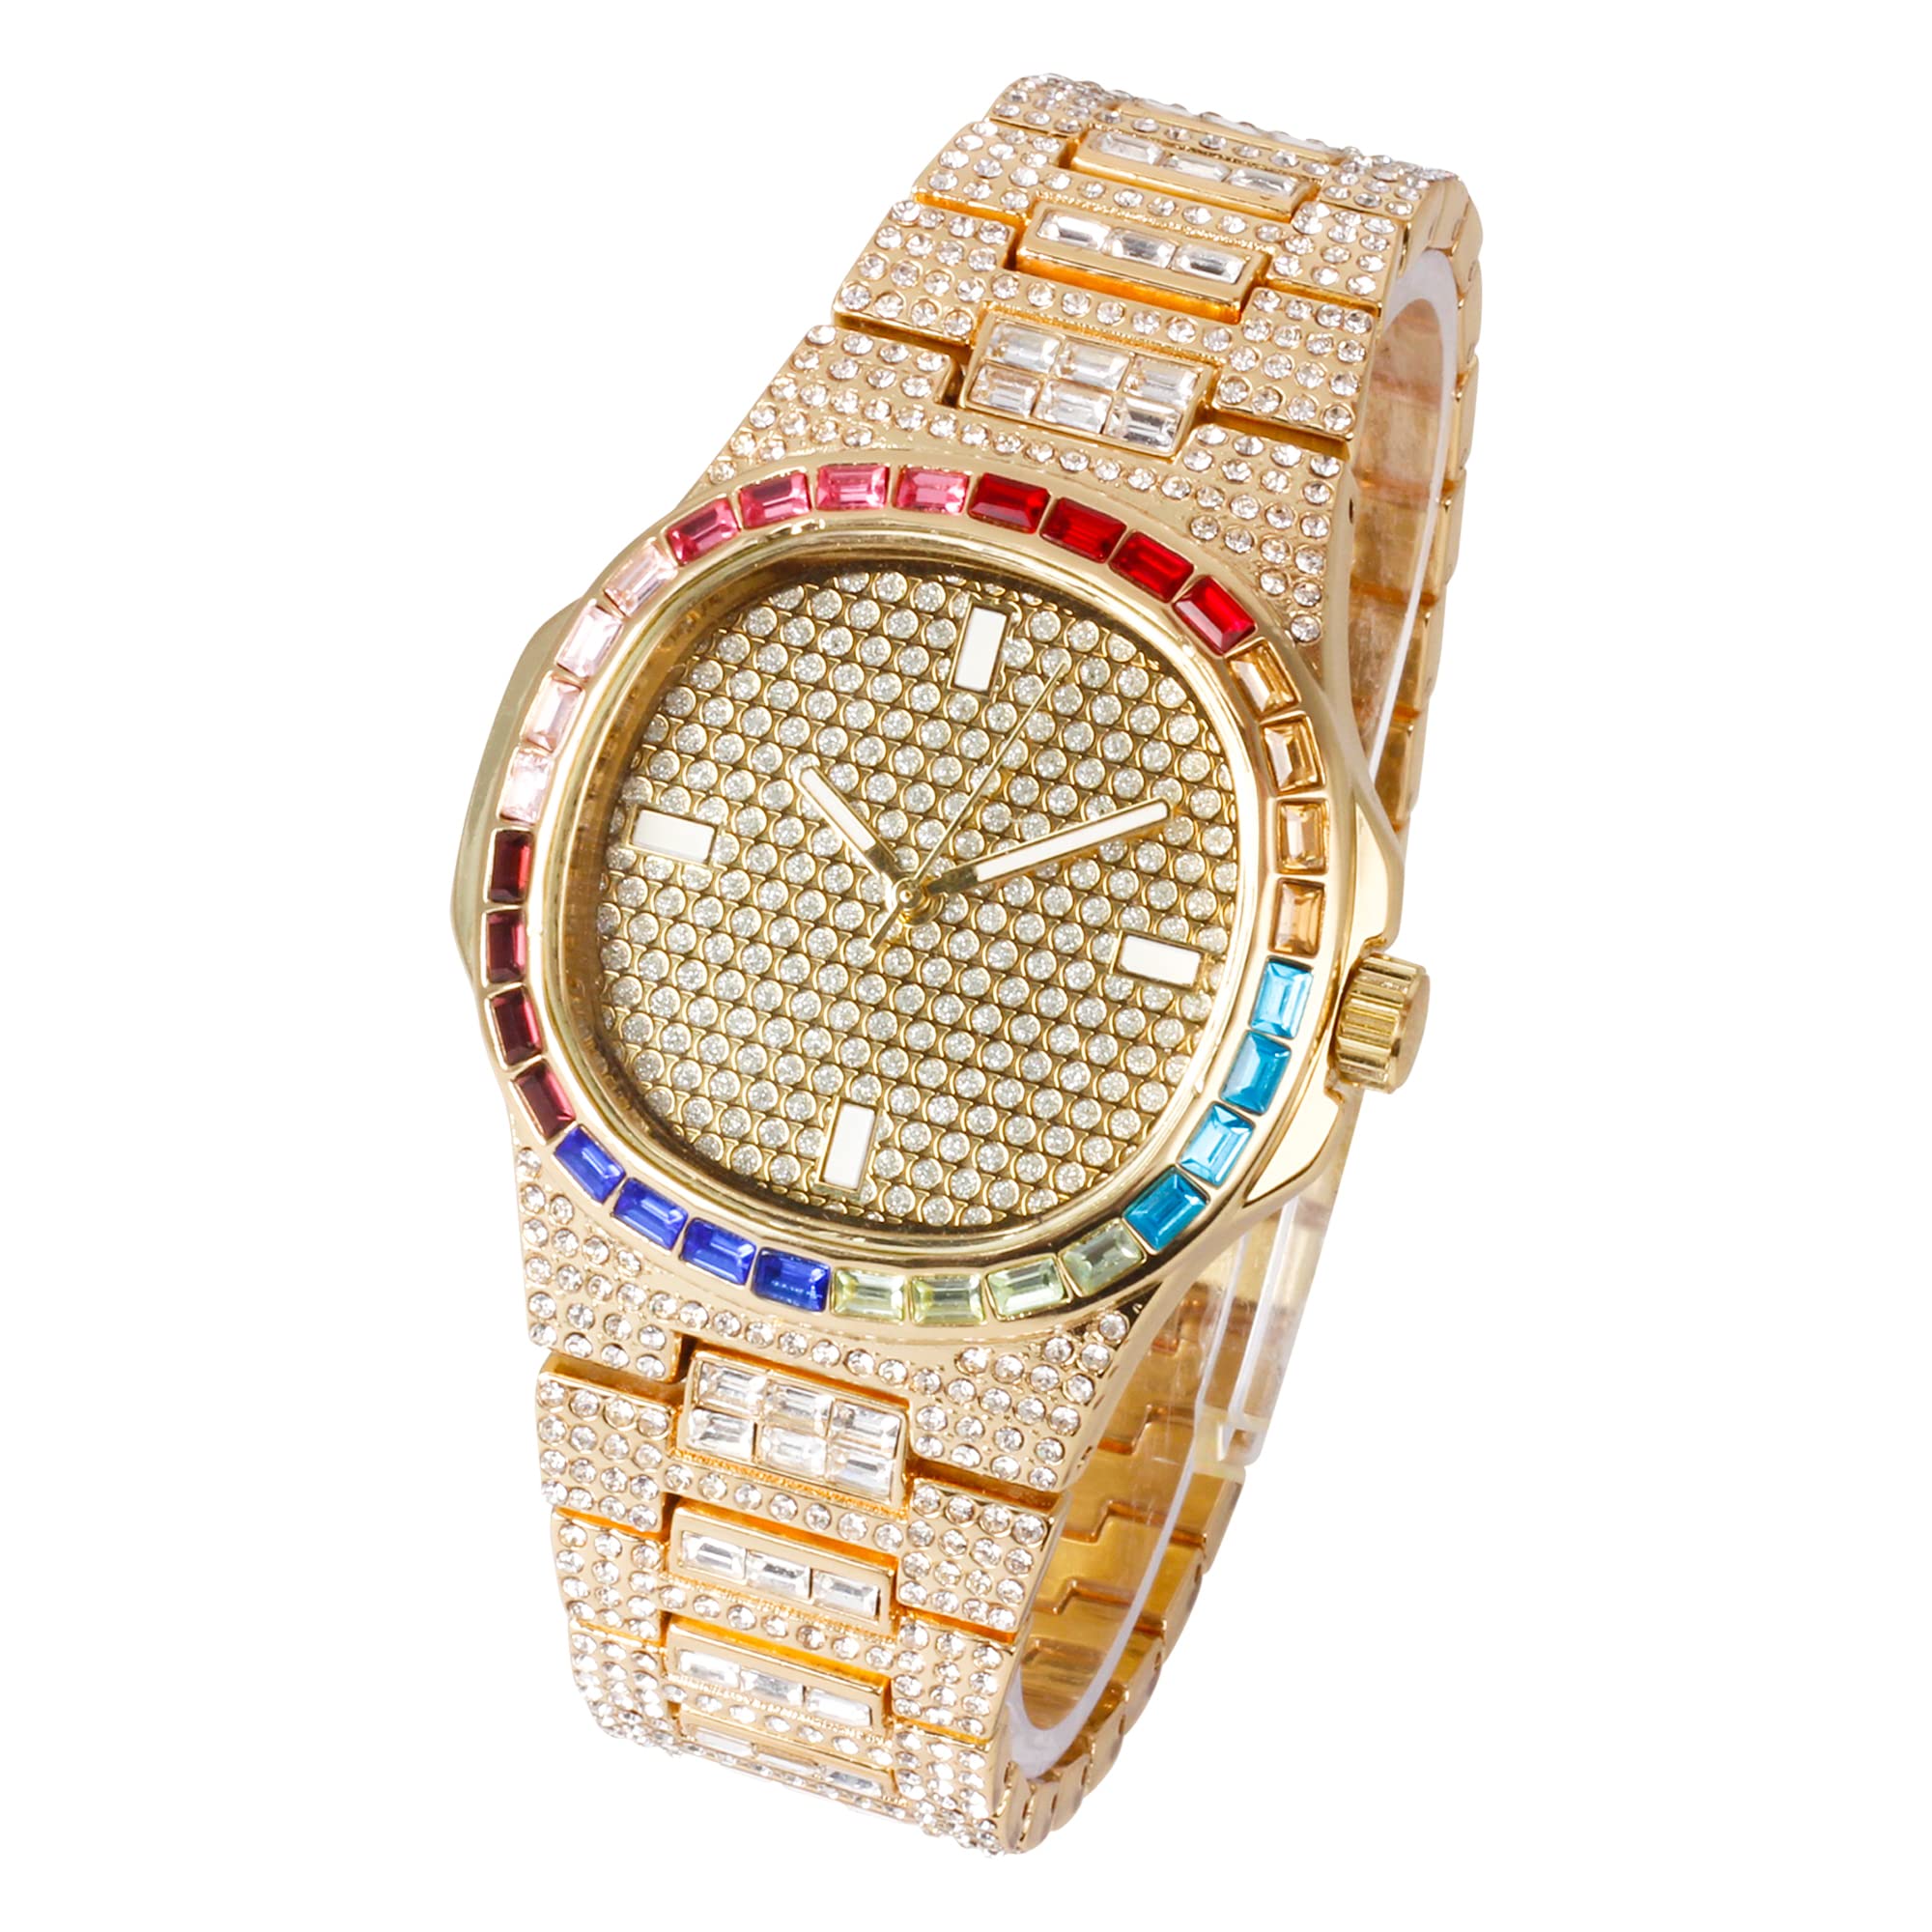 Men's Square Dial Watch 42mm Gold - "Fully Iced Band"